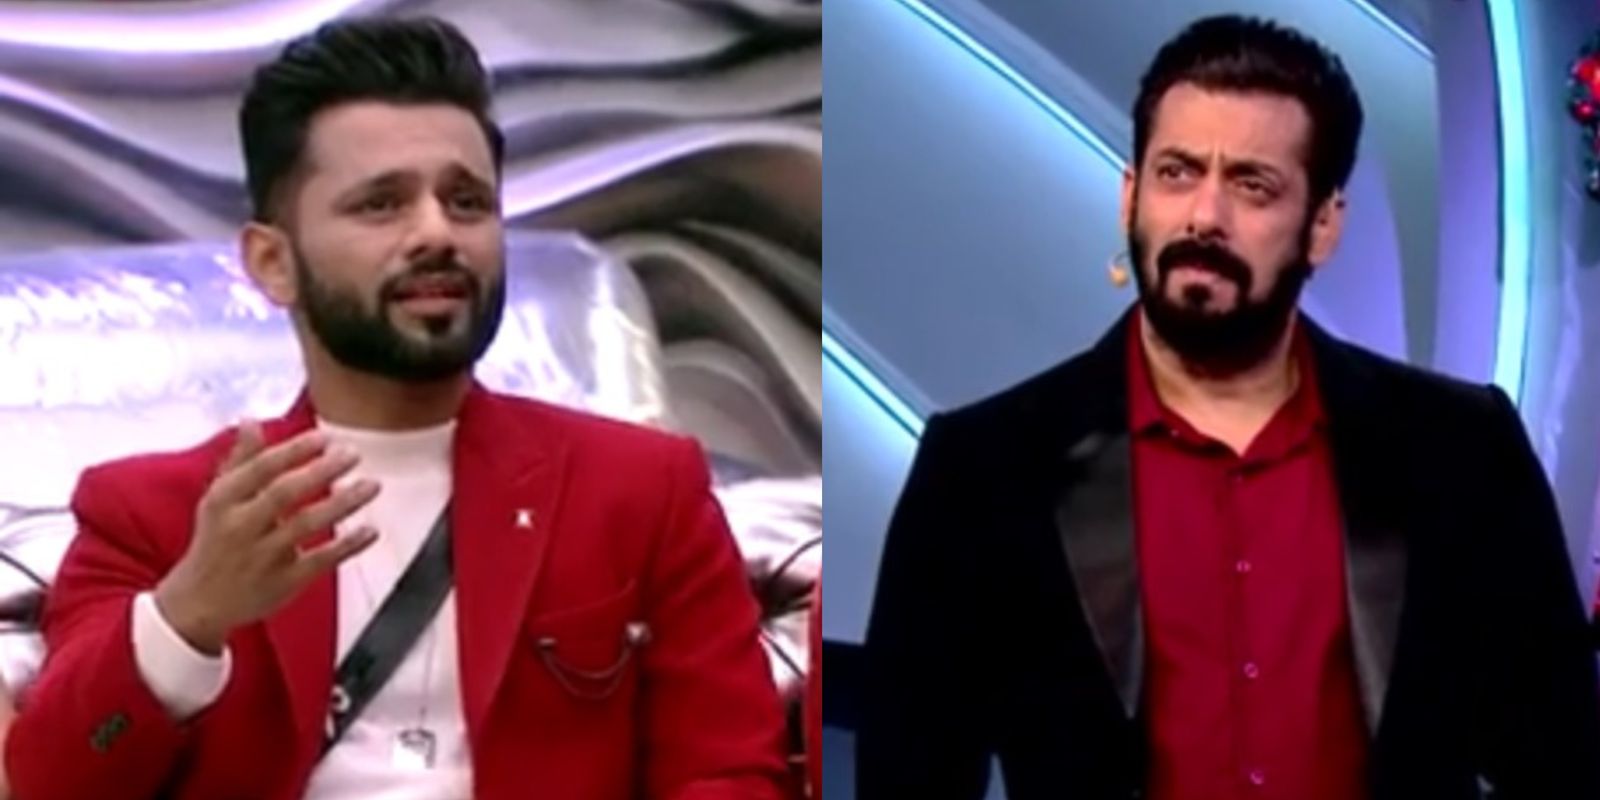 Bigg Boss 14: Rahul Vaidya’s Fans Shower Love And Support On Twitter After Host Salman Khan Takes His Class